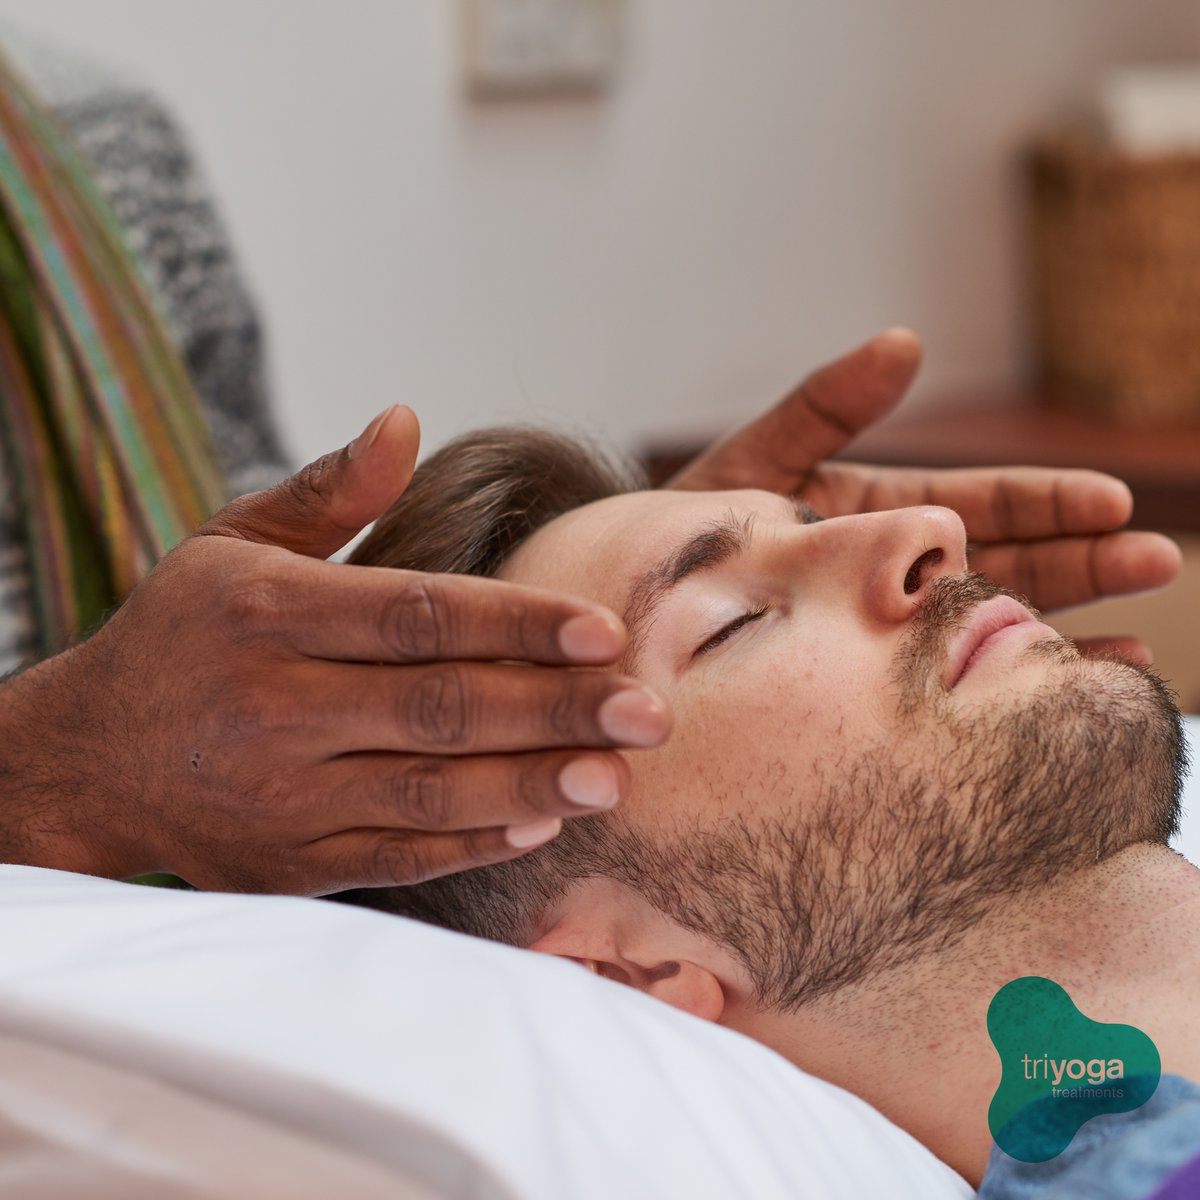 We’re pleased to be able to continue offering treatments throughout tier 3, online and at our Camden and Chelsea studios. Nourish your whole self – mind, body and soul. Visit our website for full details and to book triyoga.co.uk/treatments